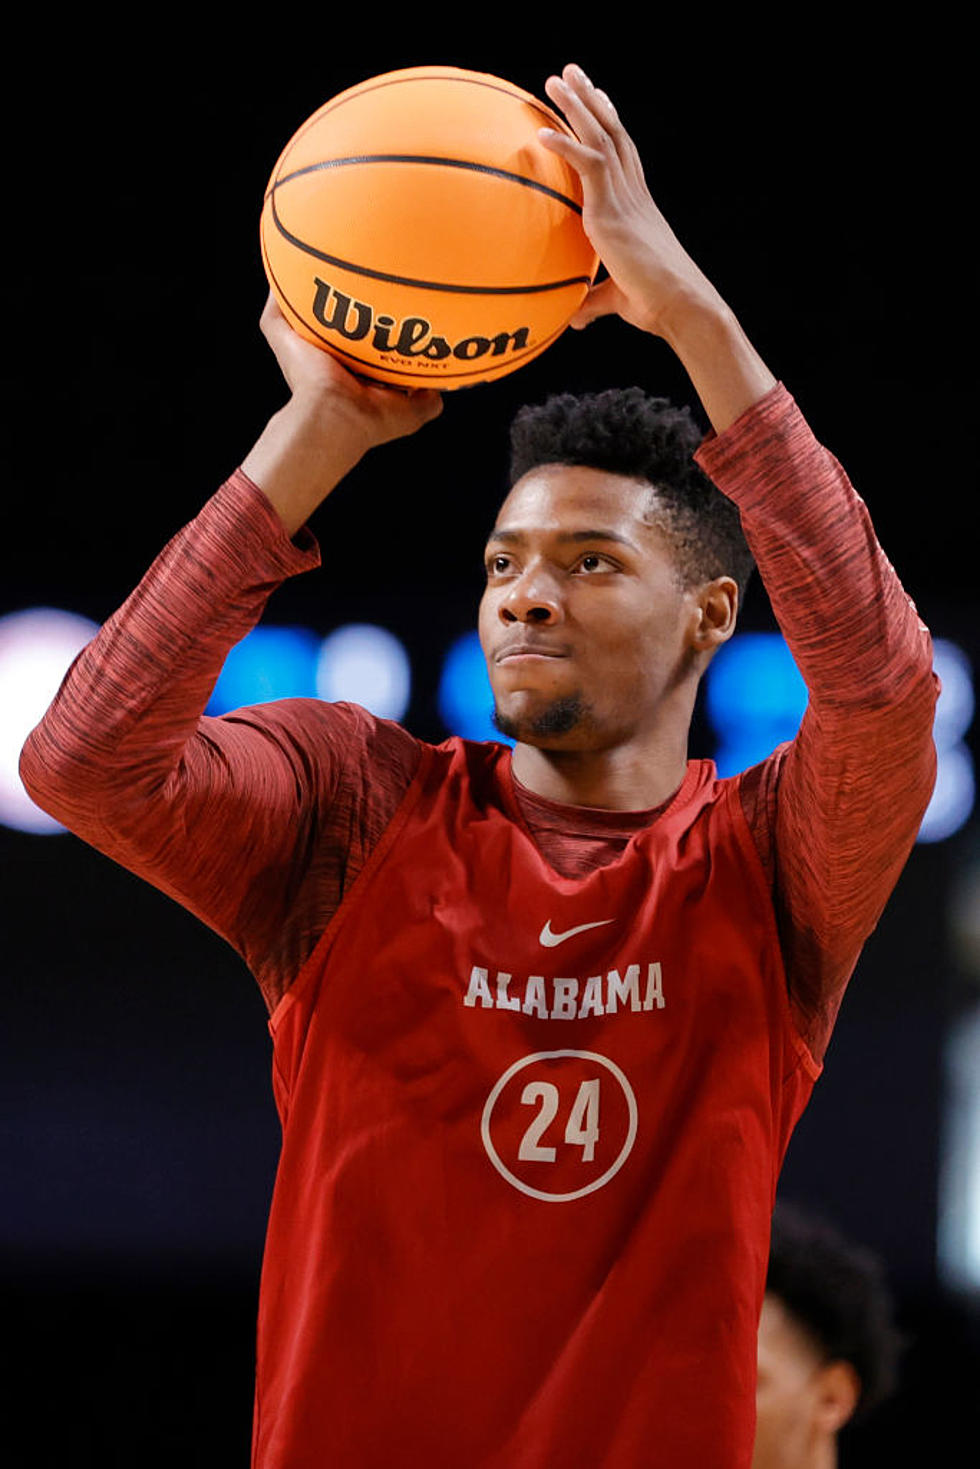 Did Oversized Balls Lead To Alabama's Tourney Loss In Louisville?